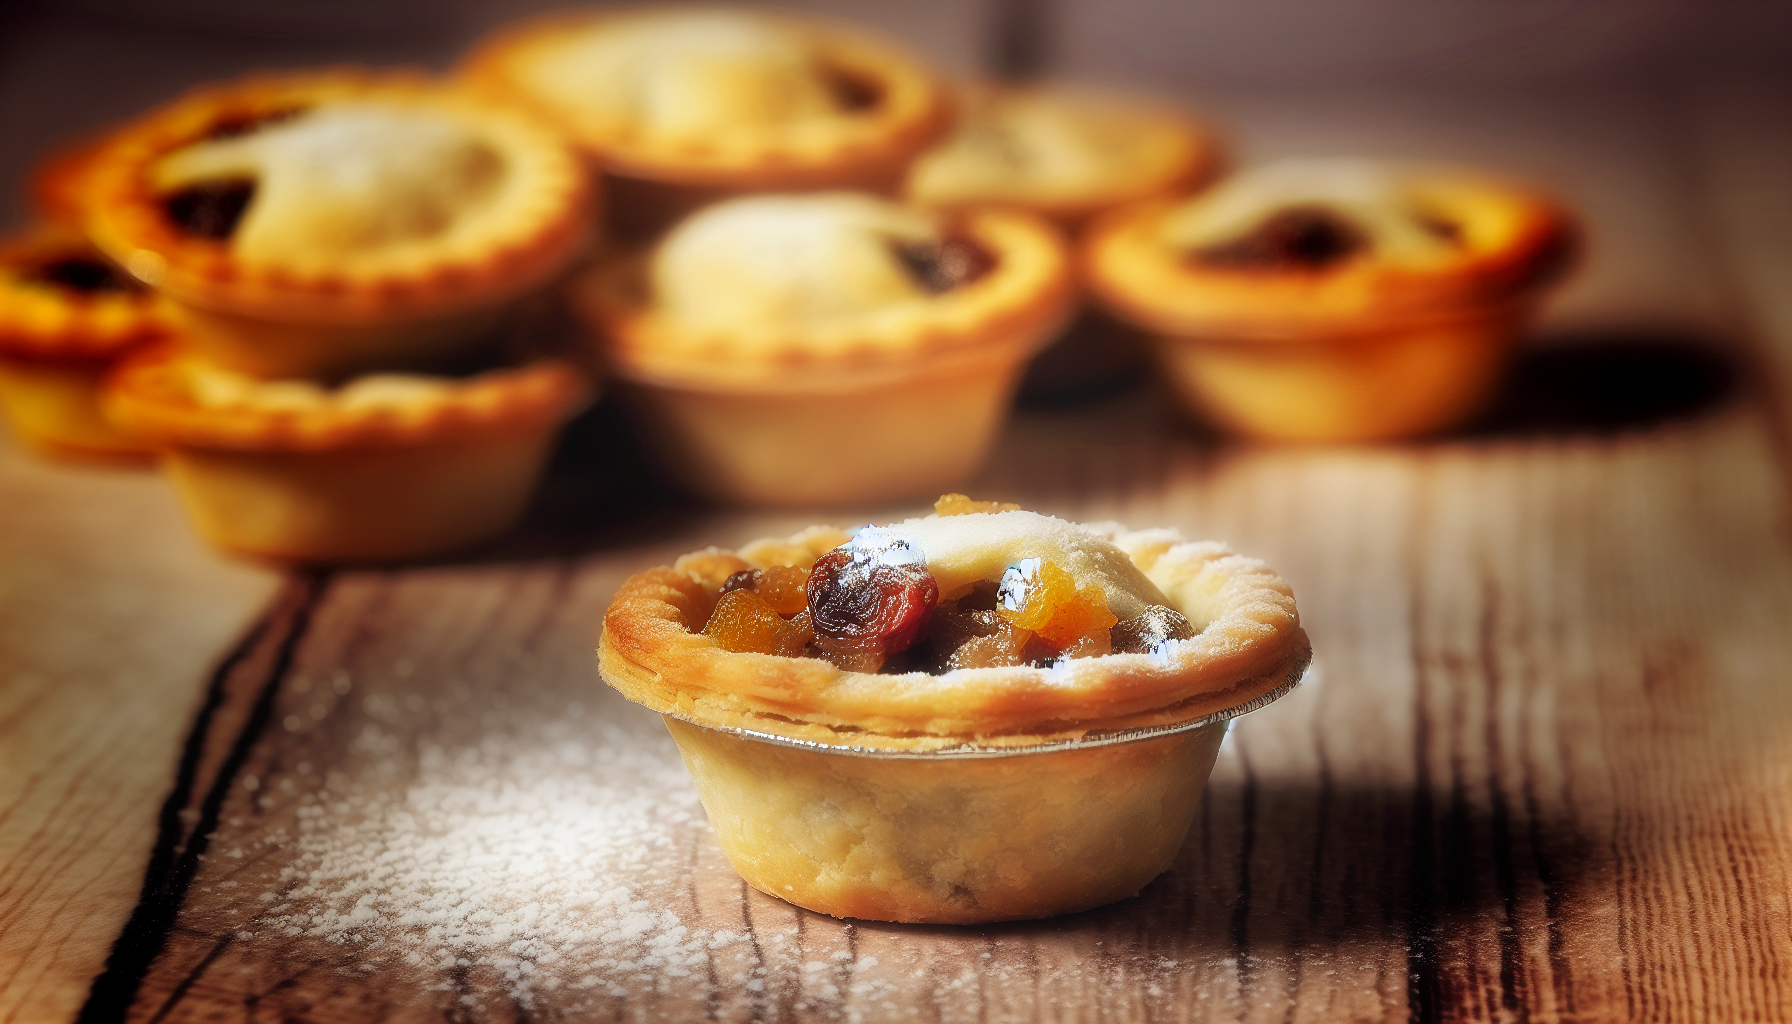 Mince Pies, a British Christmas classic featuring a buttery pastry filled with a mixture of dried fruits and spices